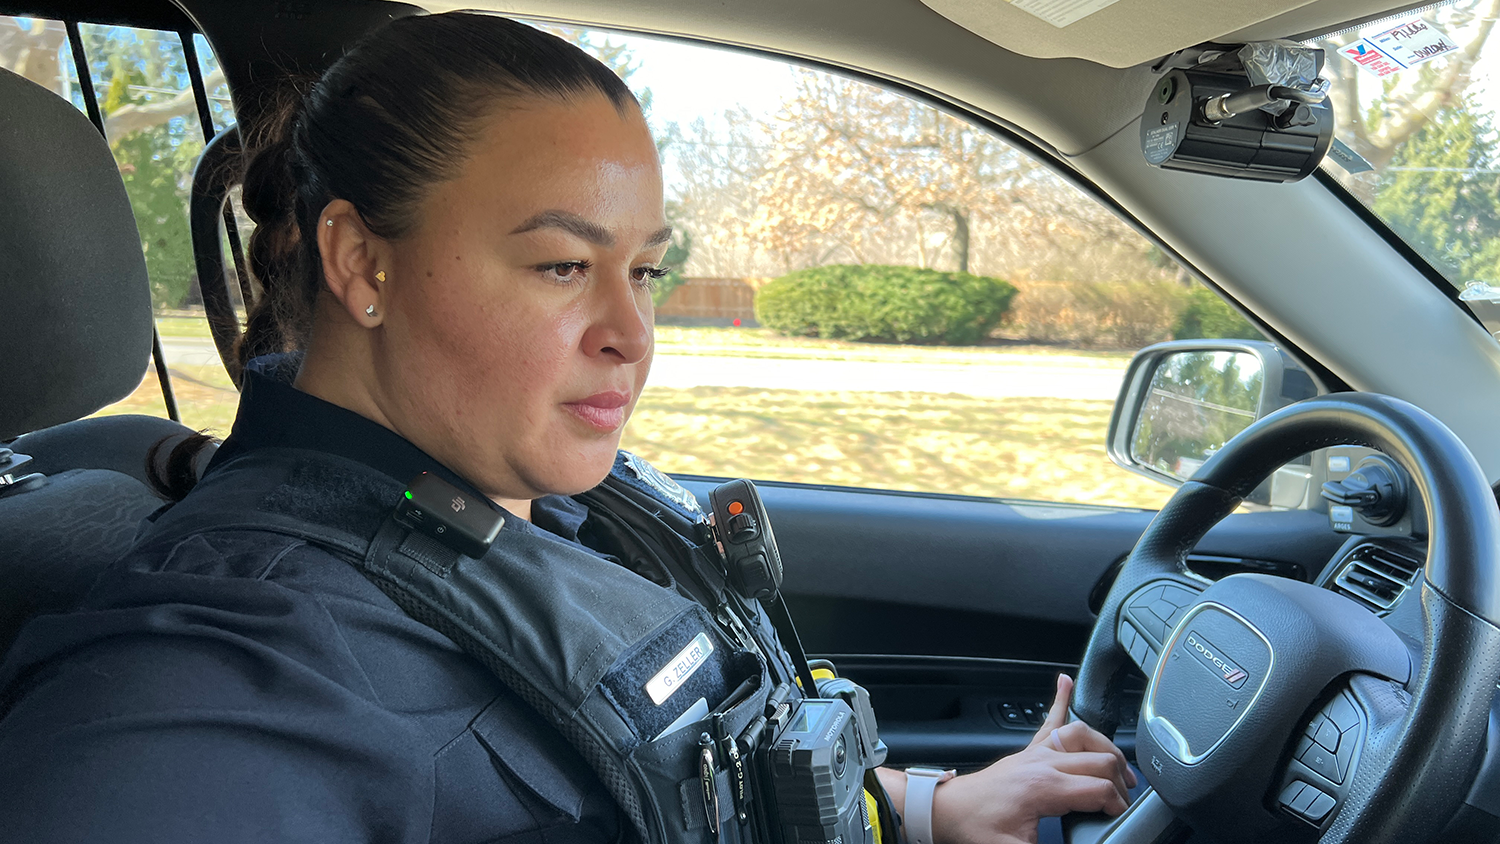 An Overland Park police officer works inside their police vehicle.